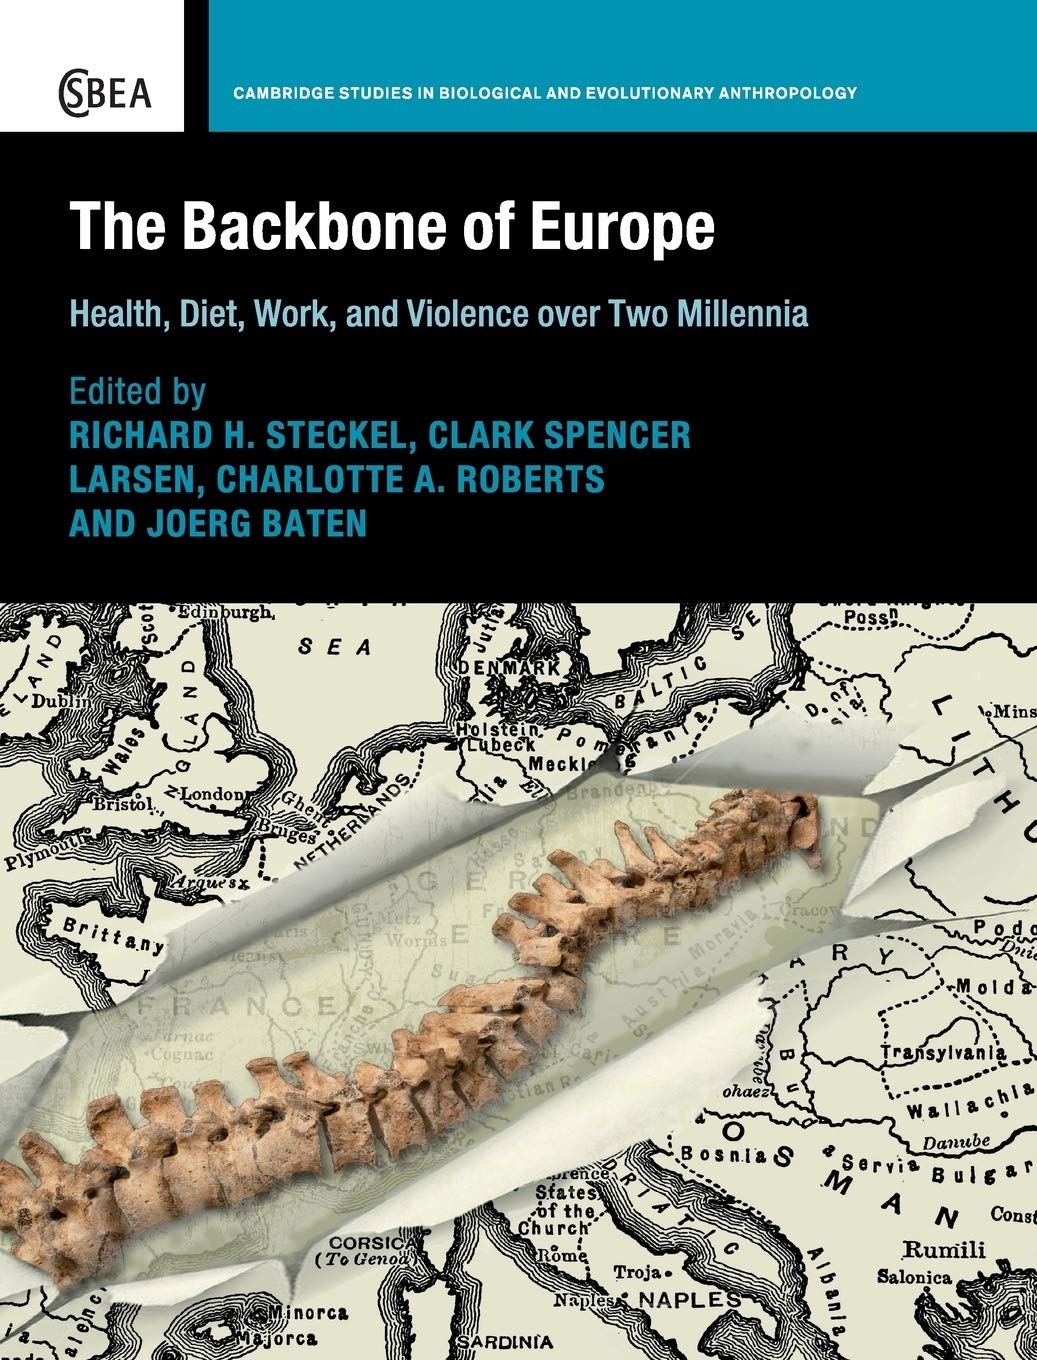 Book cover with map and photo of a human backbone